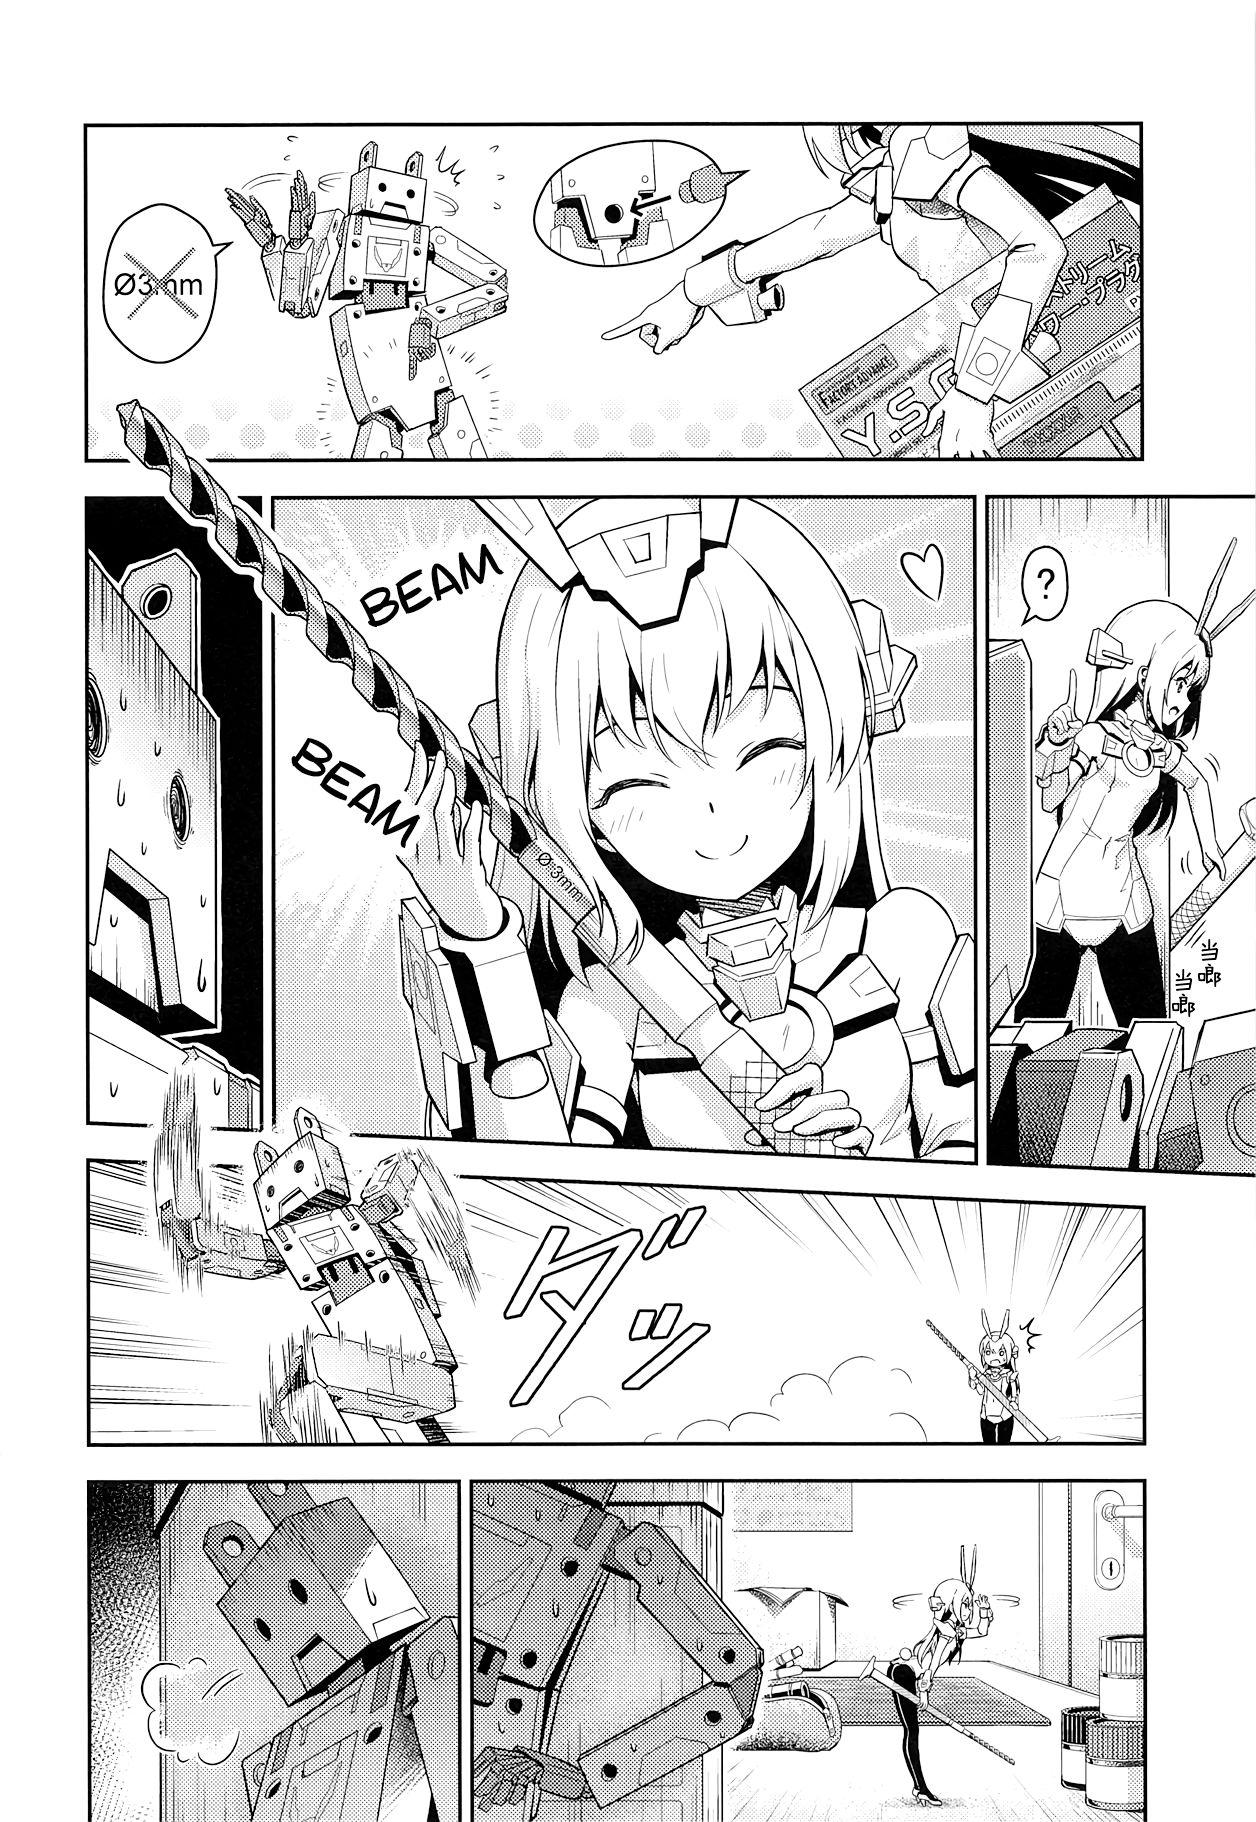 Transsexual Base, Juuden Shitai! - Frame arms girl Breasts - Page 5